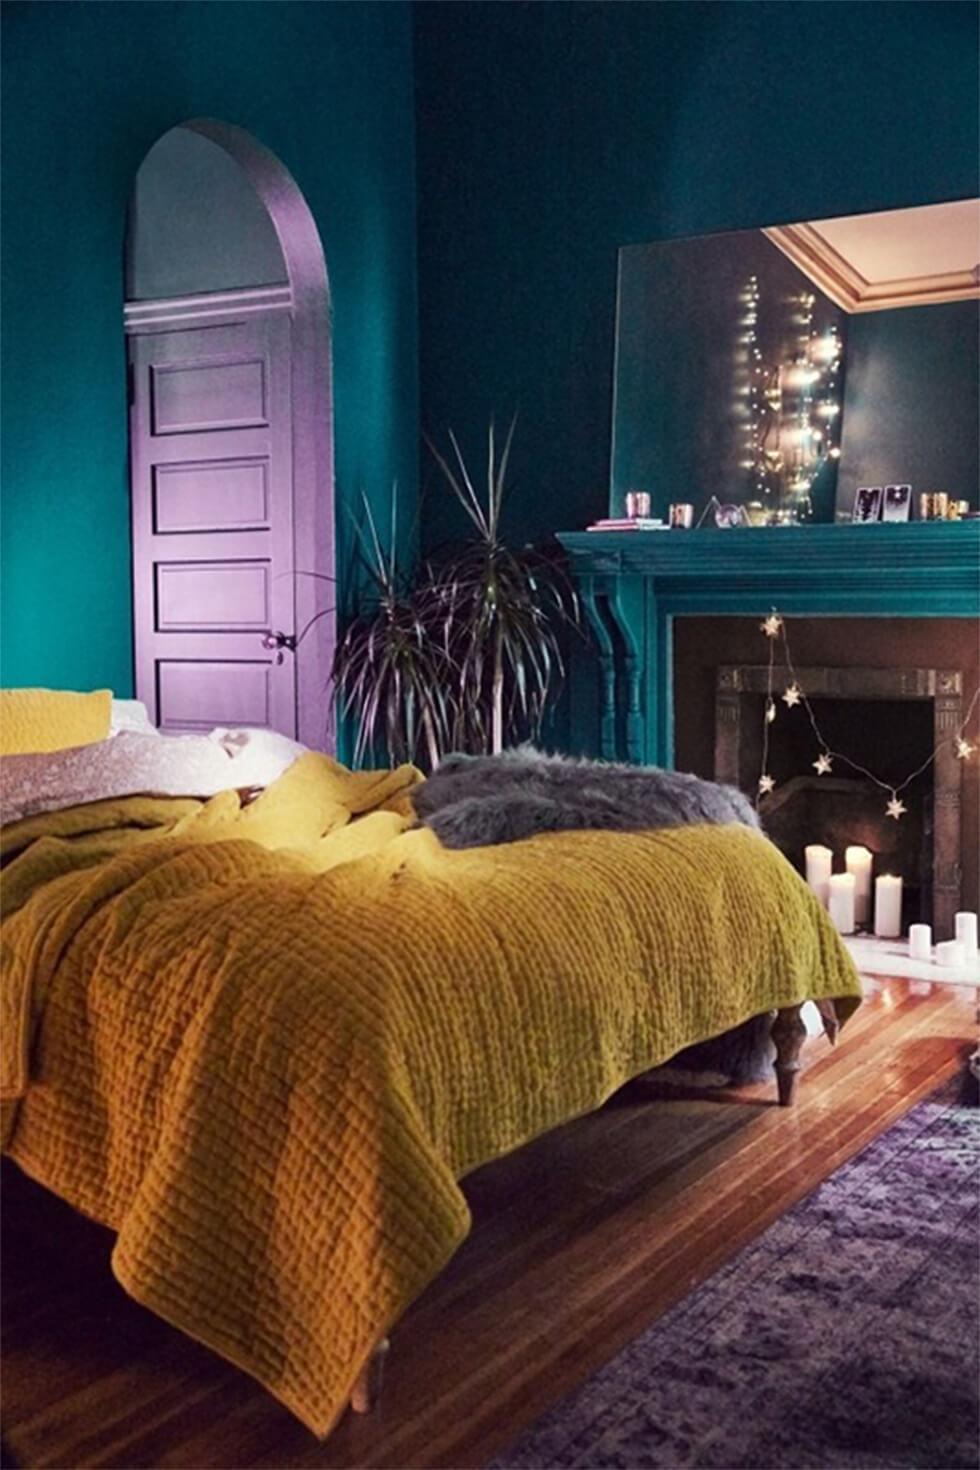 Teal and purple bedroom with mustard bedding